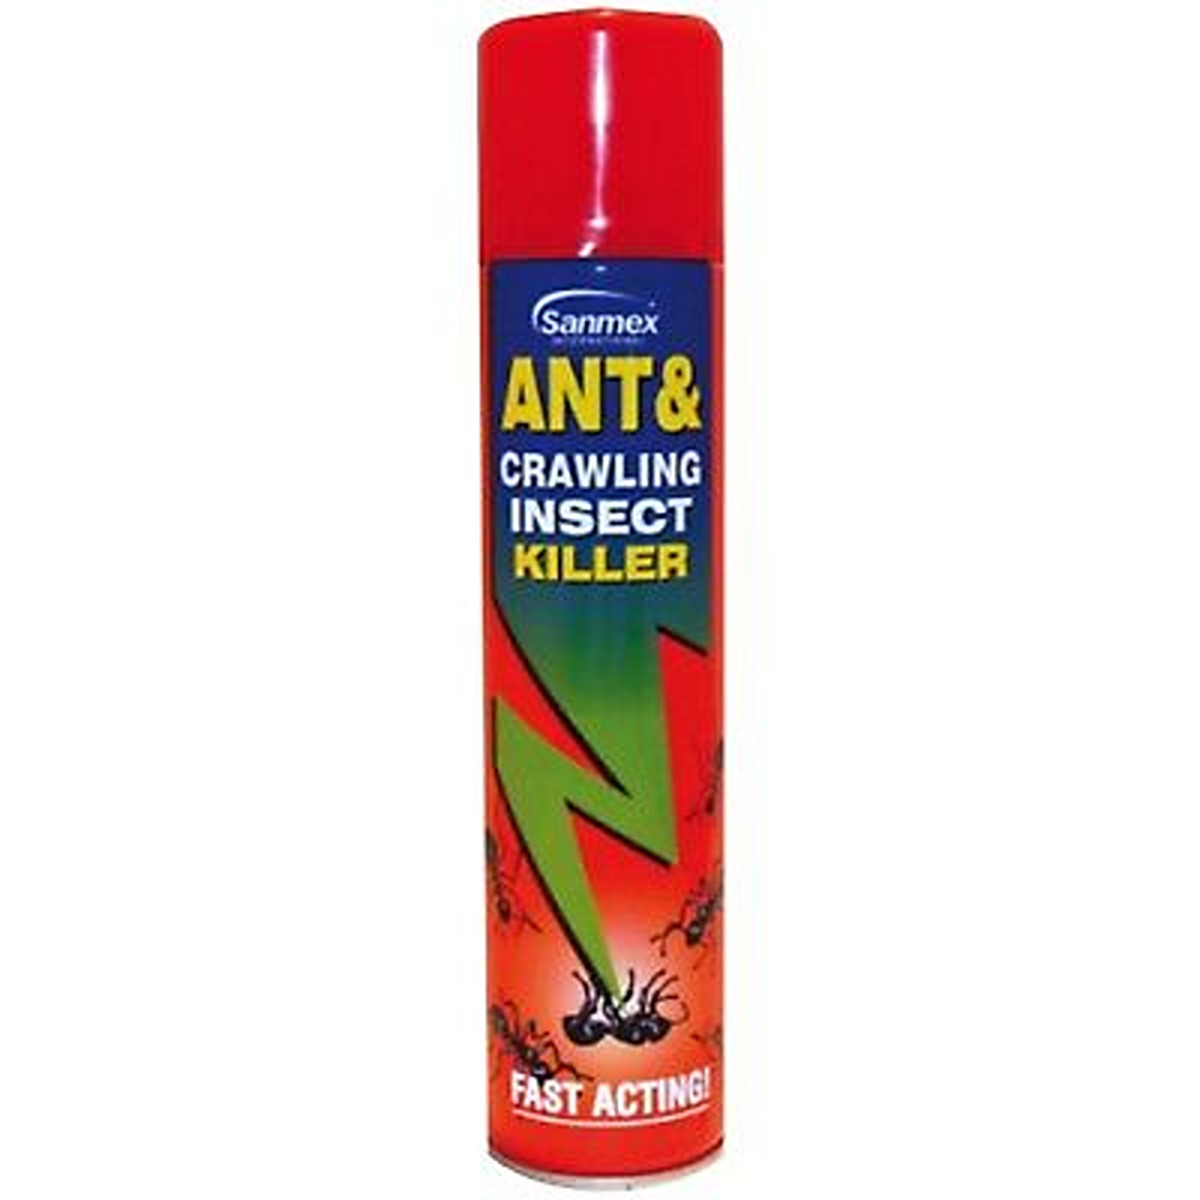 Sanmex - Ant and Crawling Insect Killer - 300ml, manufactured by Sanmex.